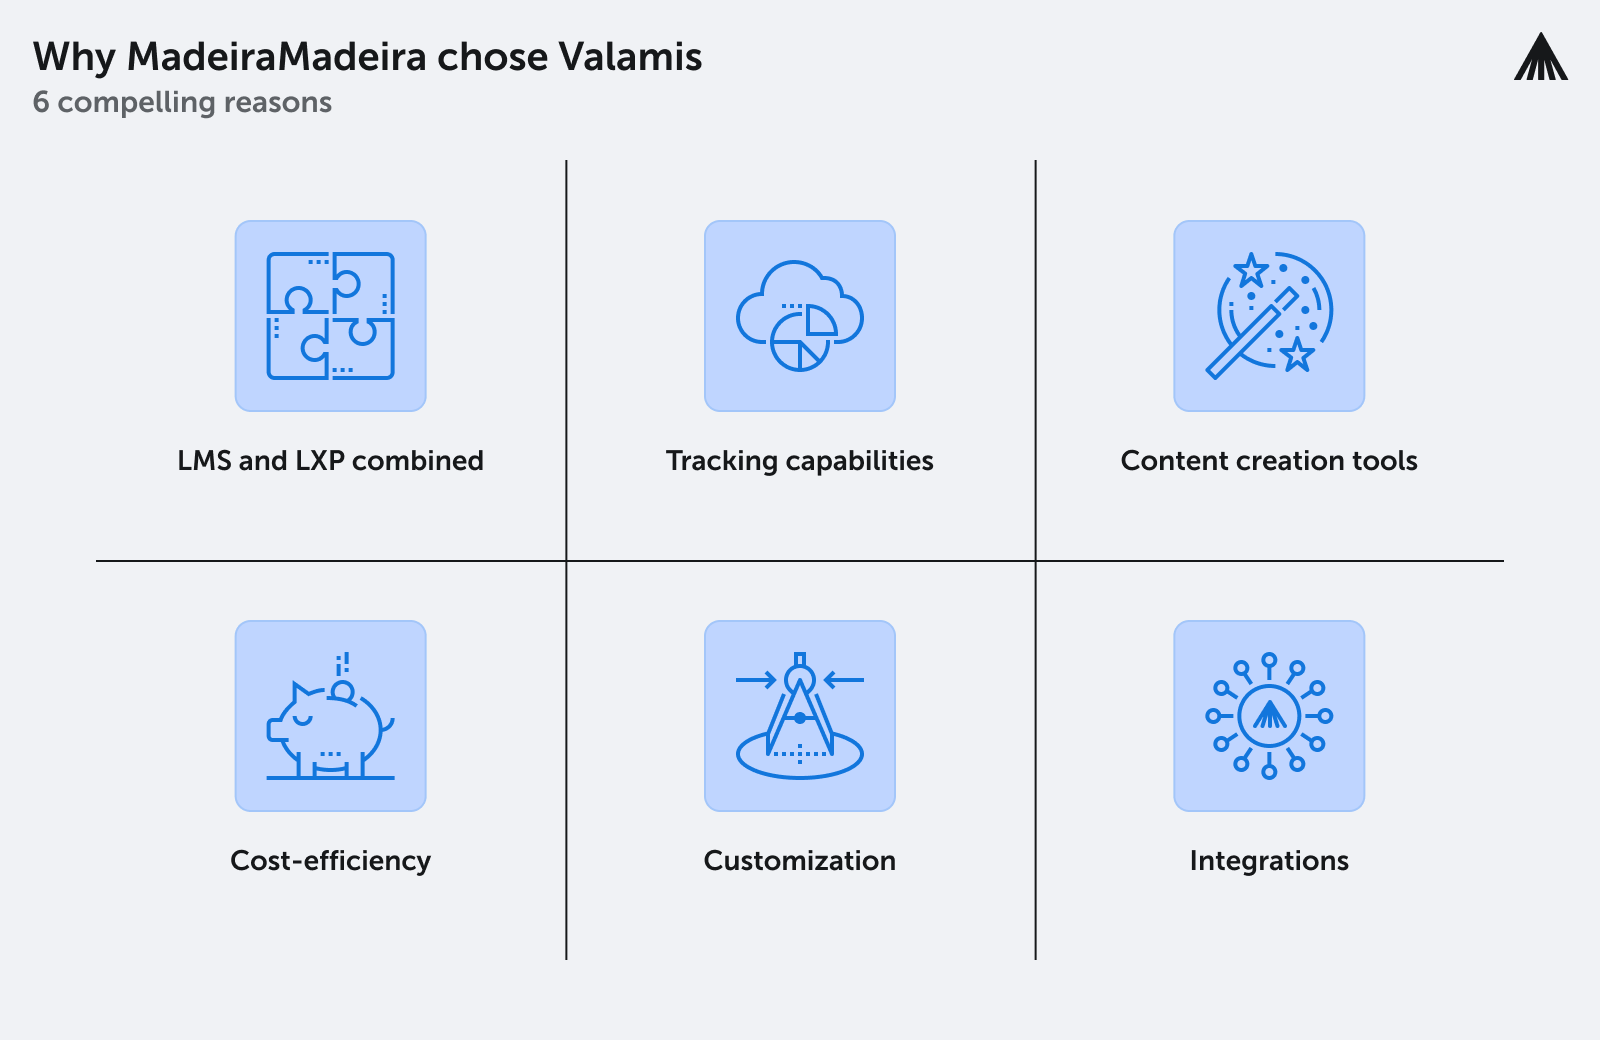 The image represents why MadeiraMadeira chose Valamis as its partner in employee learning and development